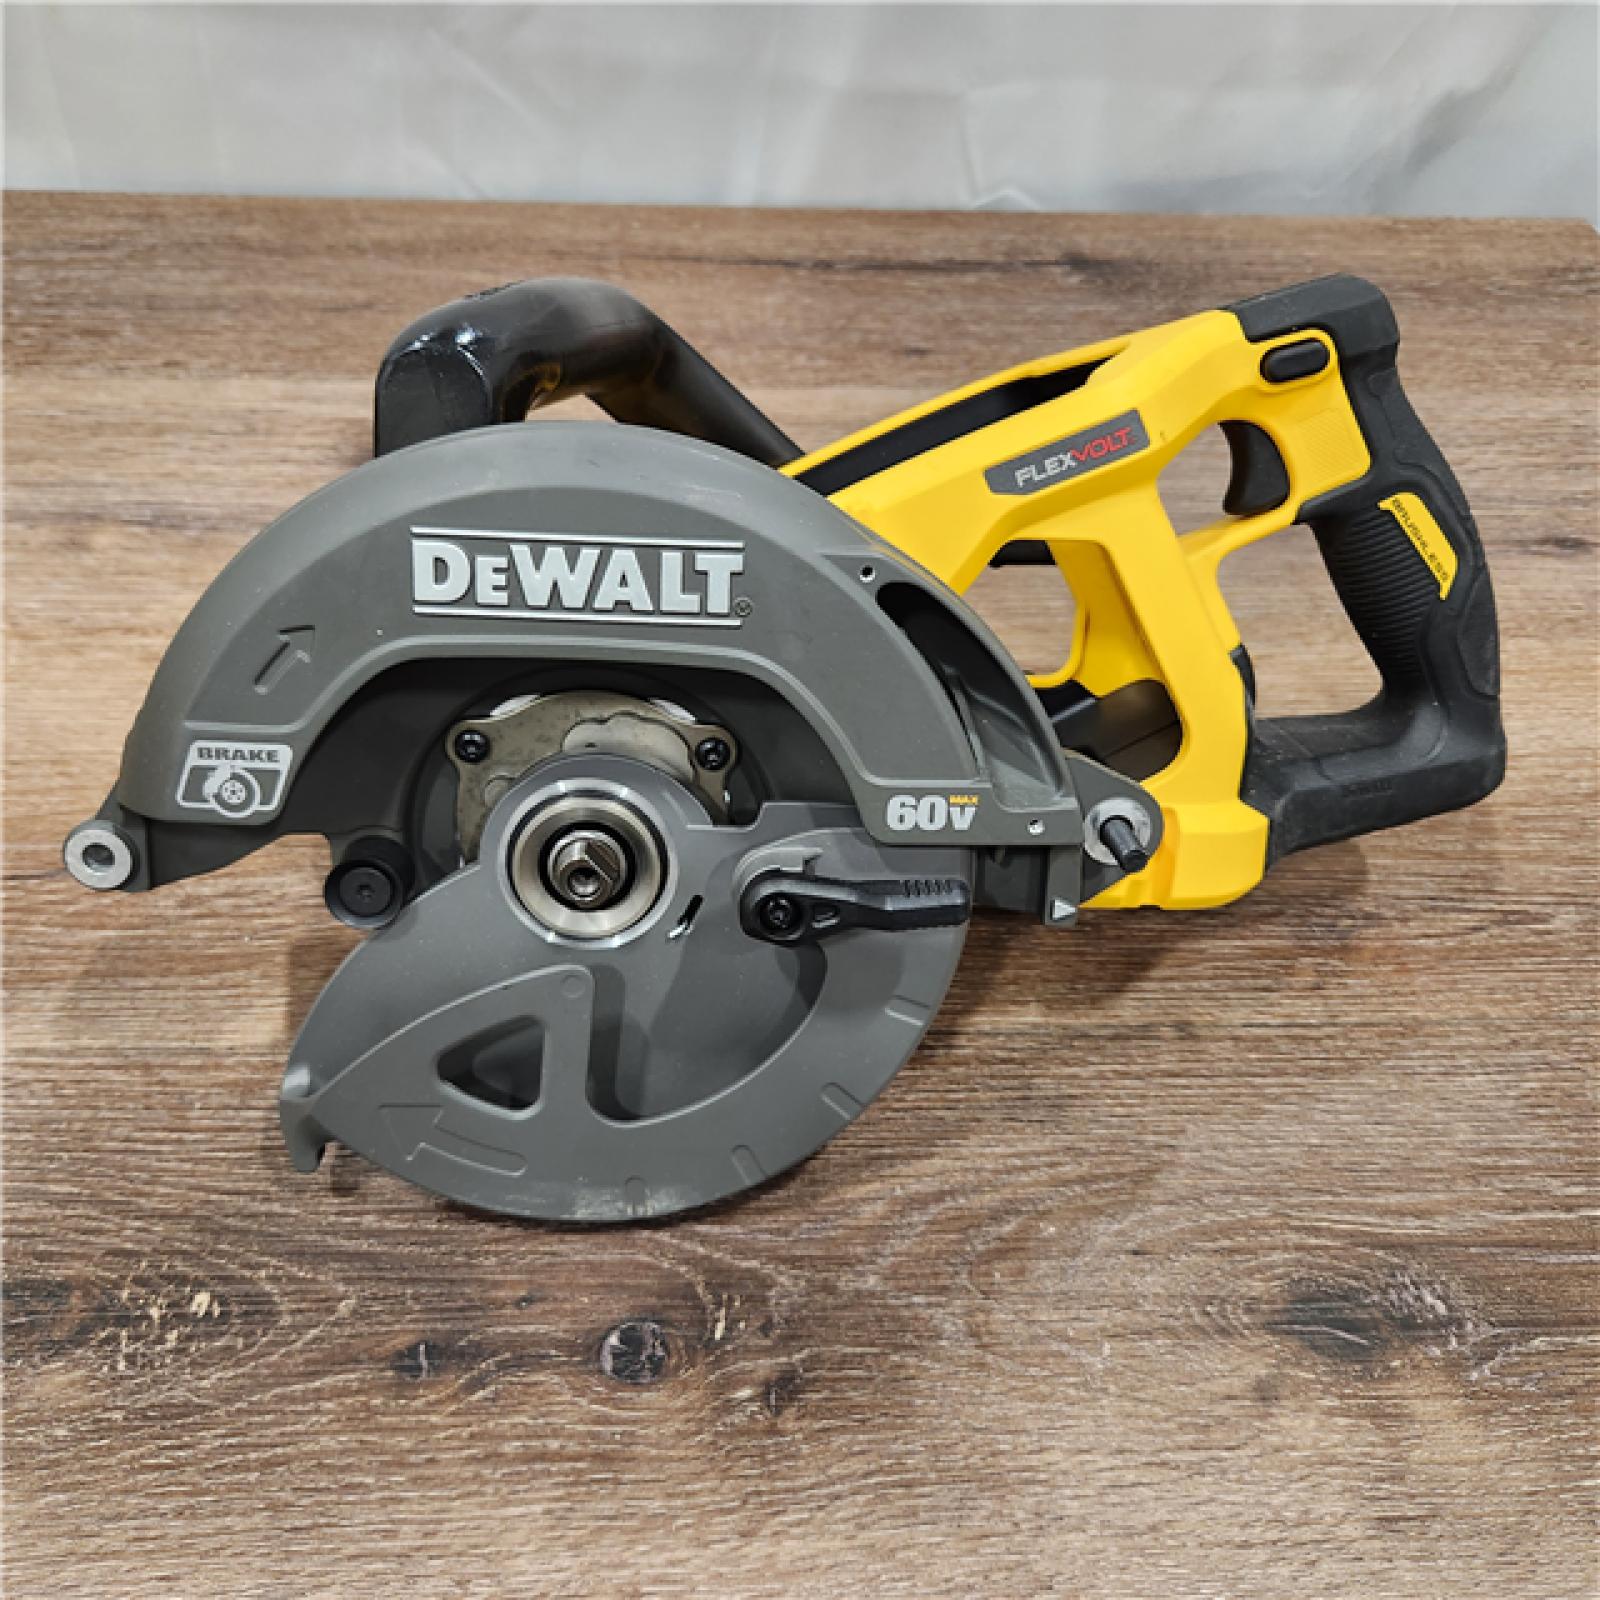 AS-IS DEWALT DCS577X1 60V FLEXVOLT MAX Lithium-Ion 7-1/4 Brushless Cordless Wormdrive Style Circular Saw Kit 9.0 Ah ( No included battery)